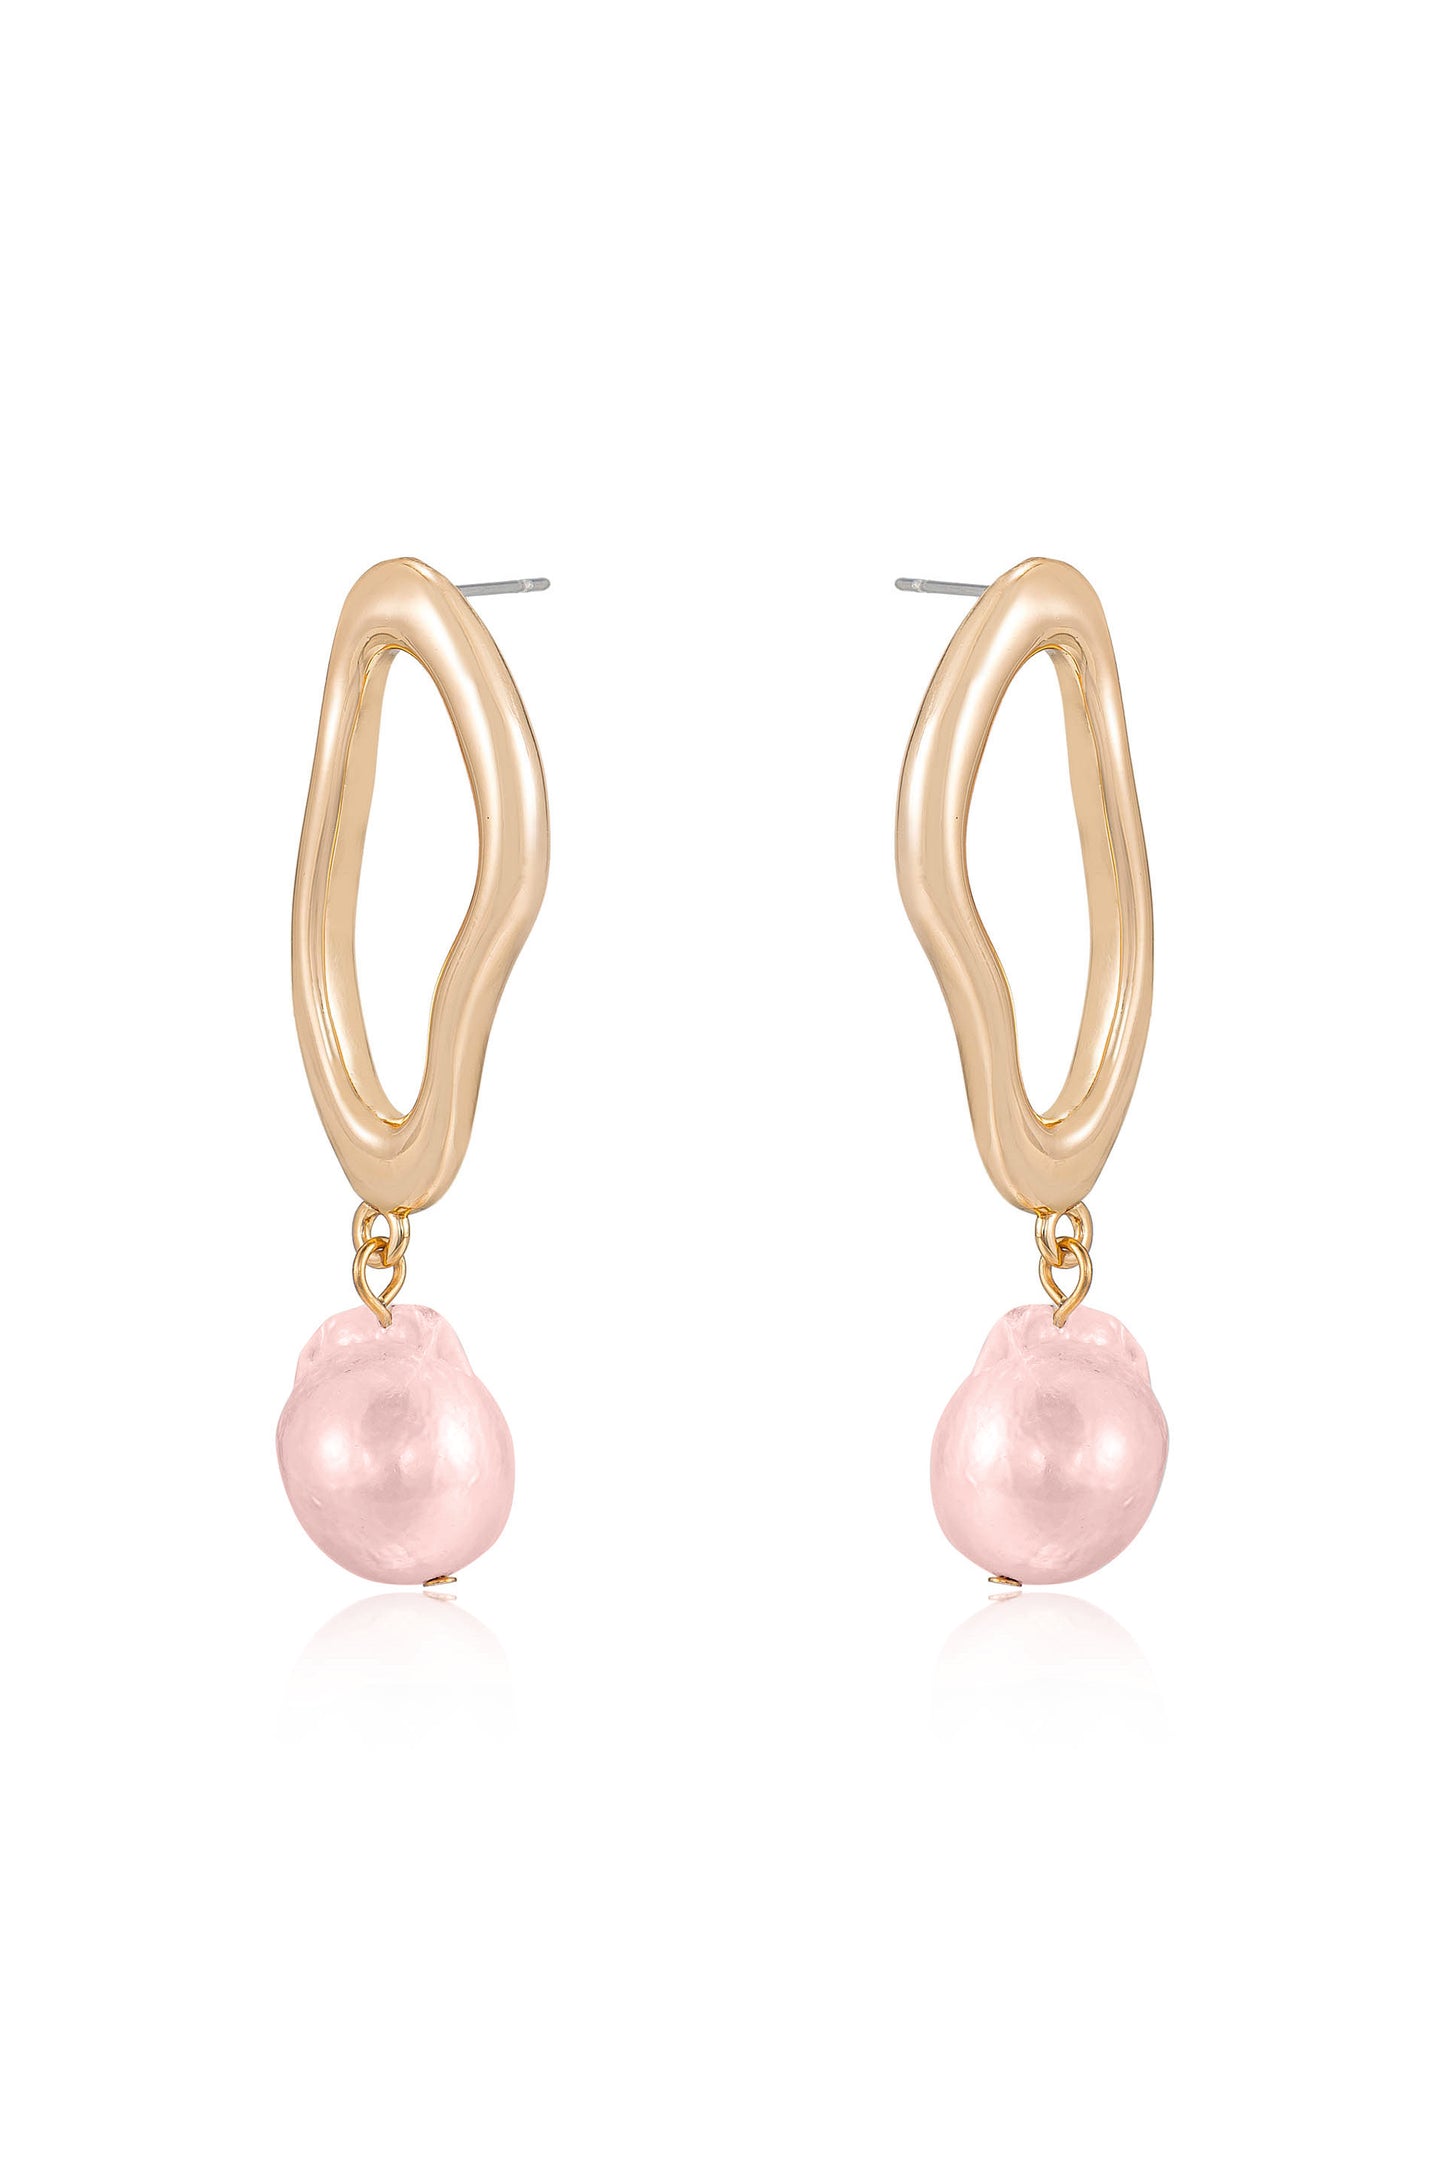 Open Circle 18k Gold Plated and Freshwater Pearl Dangle Earrings in pink pearl side view